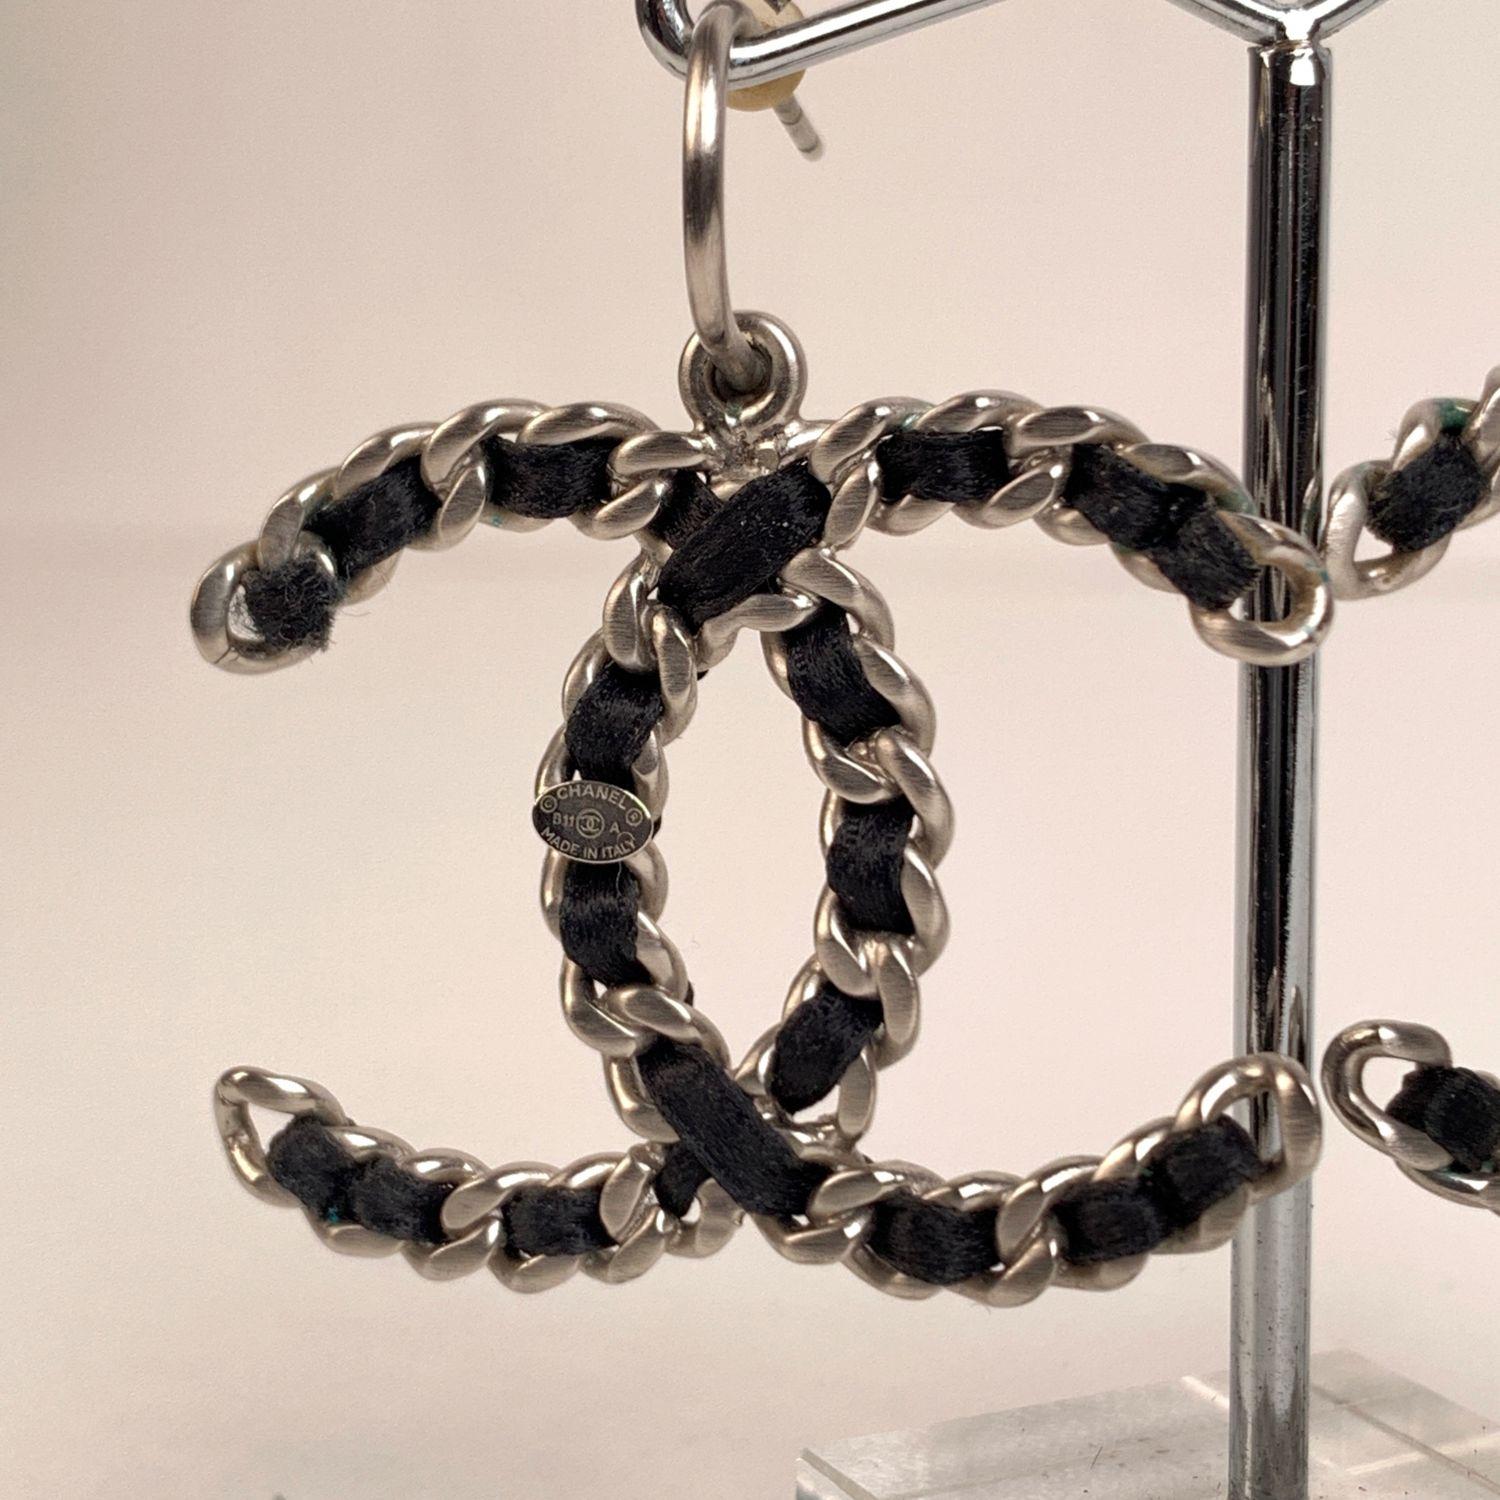 Gorgeous CHANEL dangle earrings. Screw back style. Made in silver metal with interwoven black satin ribbon. Signed ' CHANEL - B11 CC A - MADE IN ITALY' in a oval mark. Height: 1.5 inches - 3,8 cm. Width: 1.5 inches - 3,8 cm


Condition

A -